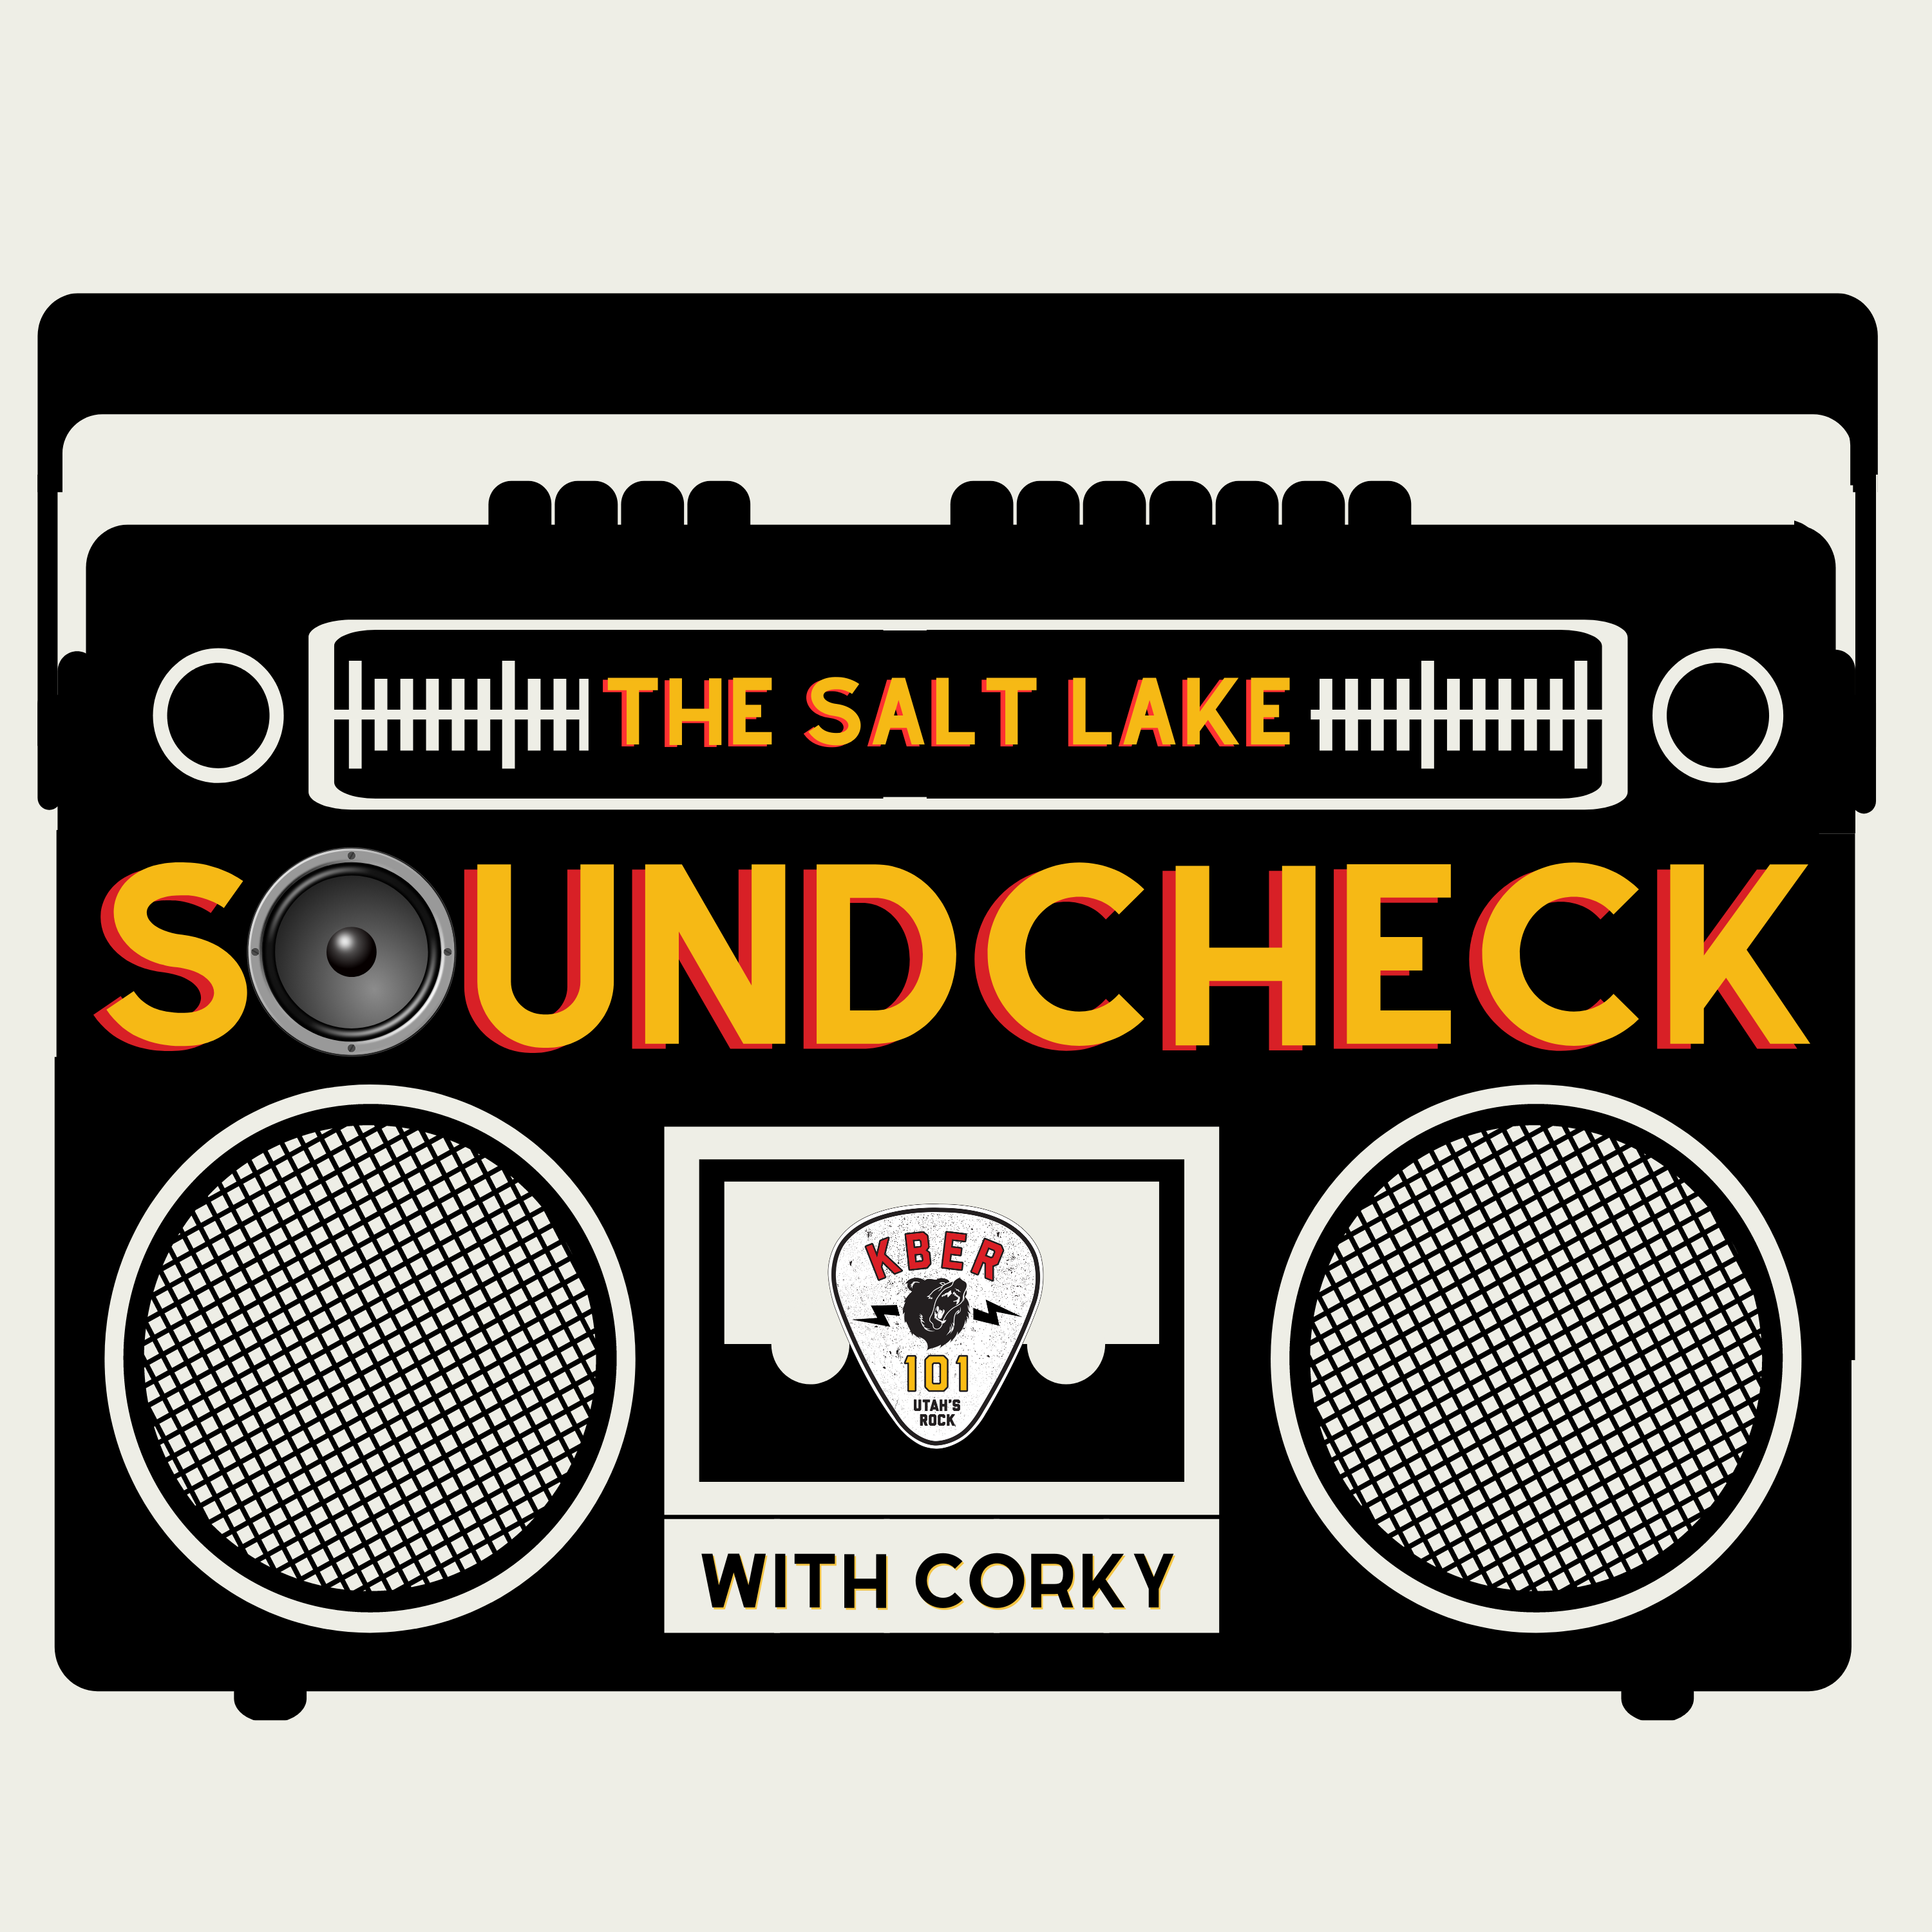 The Salt Lake Soundcheck, Is a local music show on KBER 101 hosted by Corky.  Since 2003, The Salt Lake Soundcheck highlights Utah’s local bands and their upcoming shows. Tune in to hear new local music, get to know the bands and sometimes you will hear in studio acoustic performances. Check out The Salt Lake Soundcheck every Sunday night at 10pm on KBER 101. Support Local Music and Local Shows!